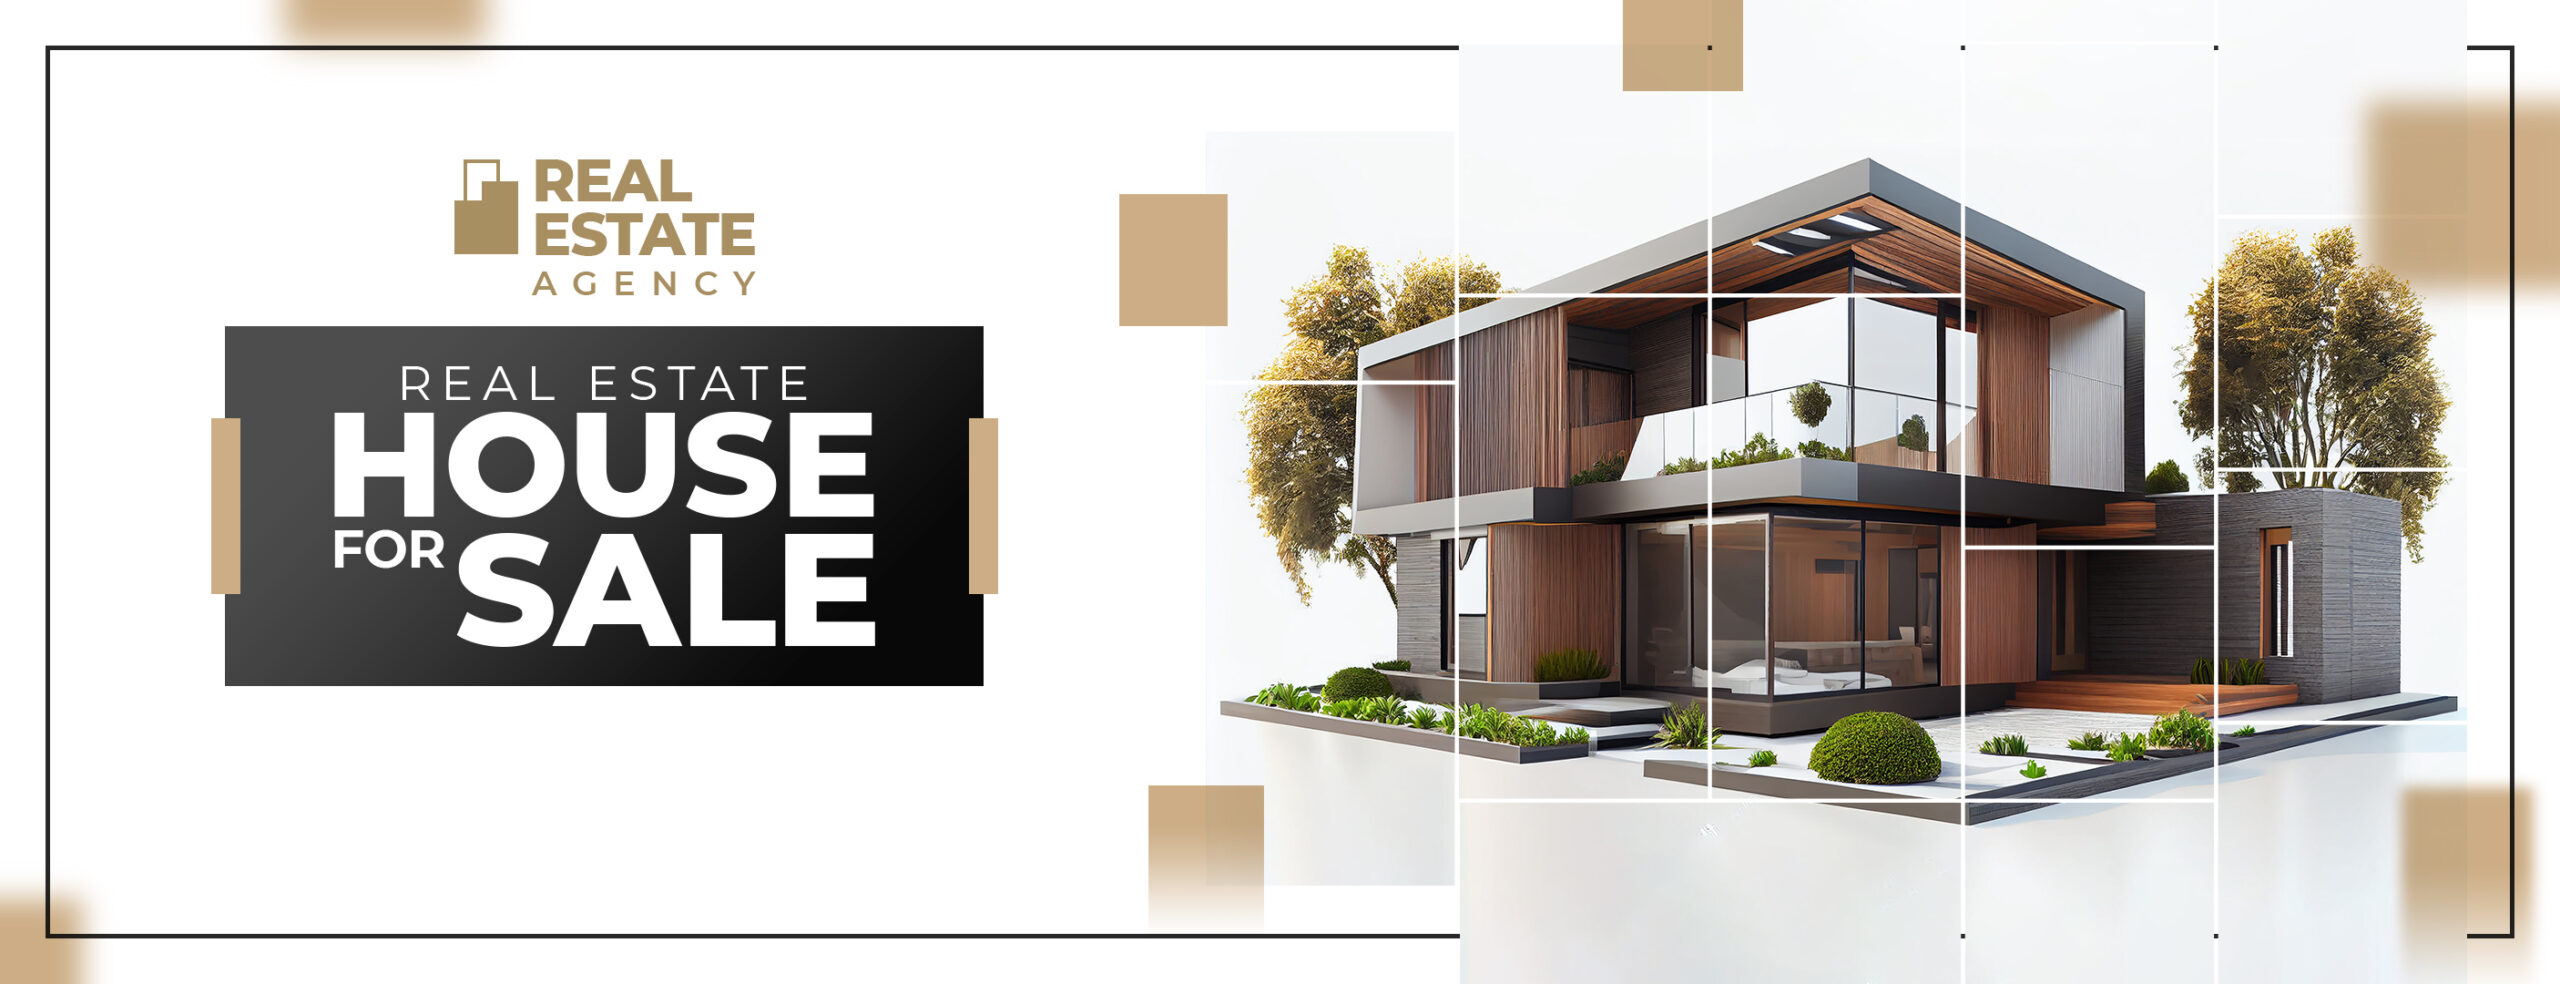 Real Estate House Property Horizontal Banner or Facebook Cover Advertising Template